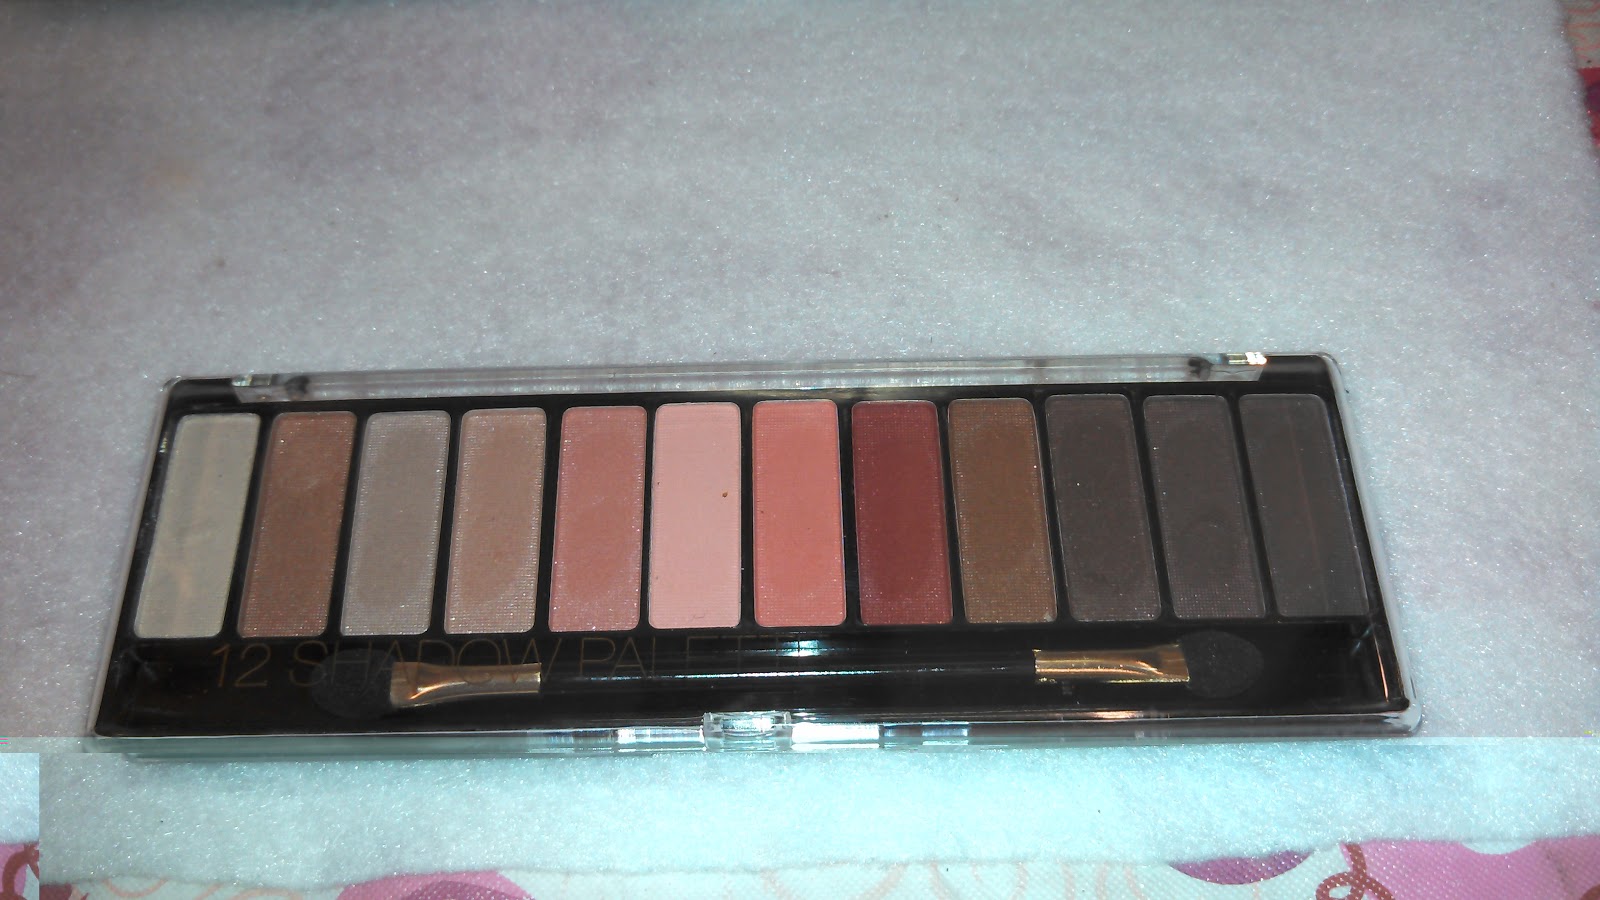 am addicted to Makeup!!!!! :): Forever 21 Love and Beauty 12 eyeshadow ...